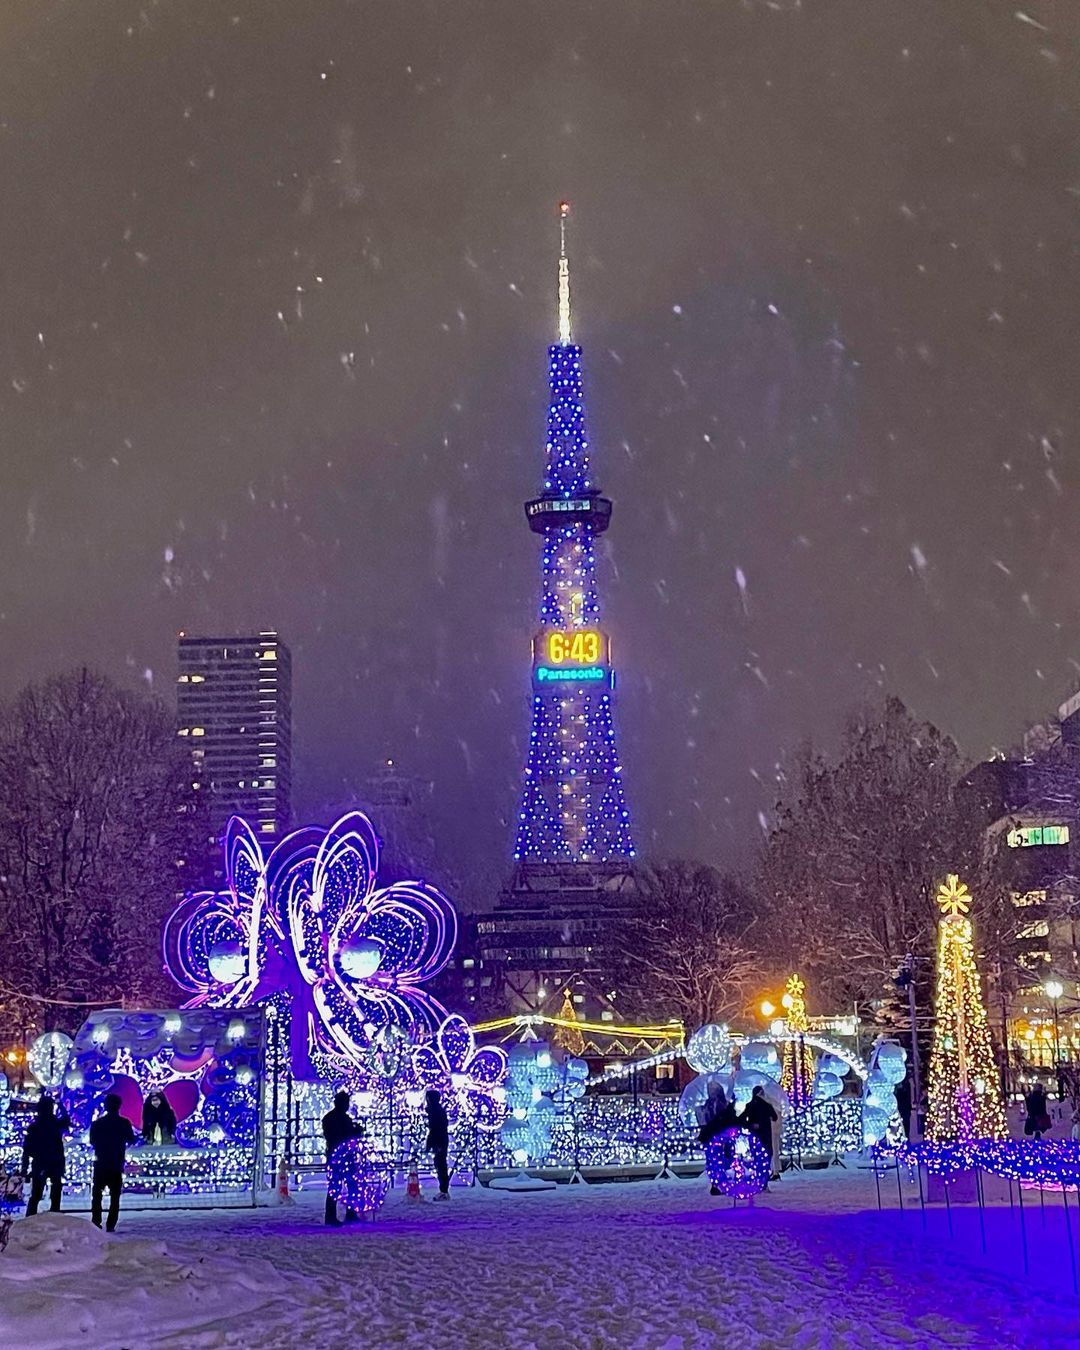 Cities in Japan to see snow - illuminated tower at Odori Park